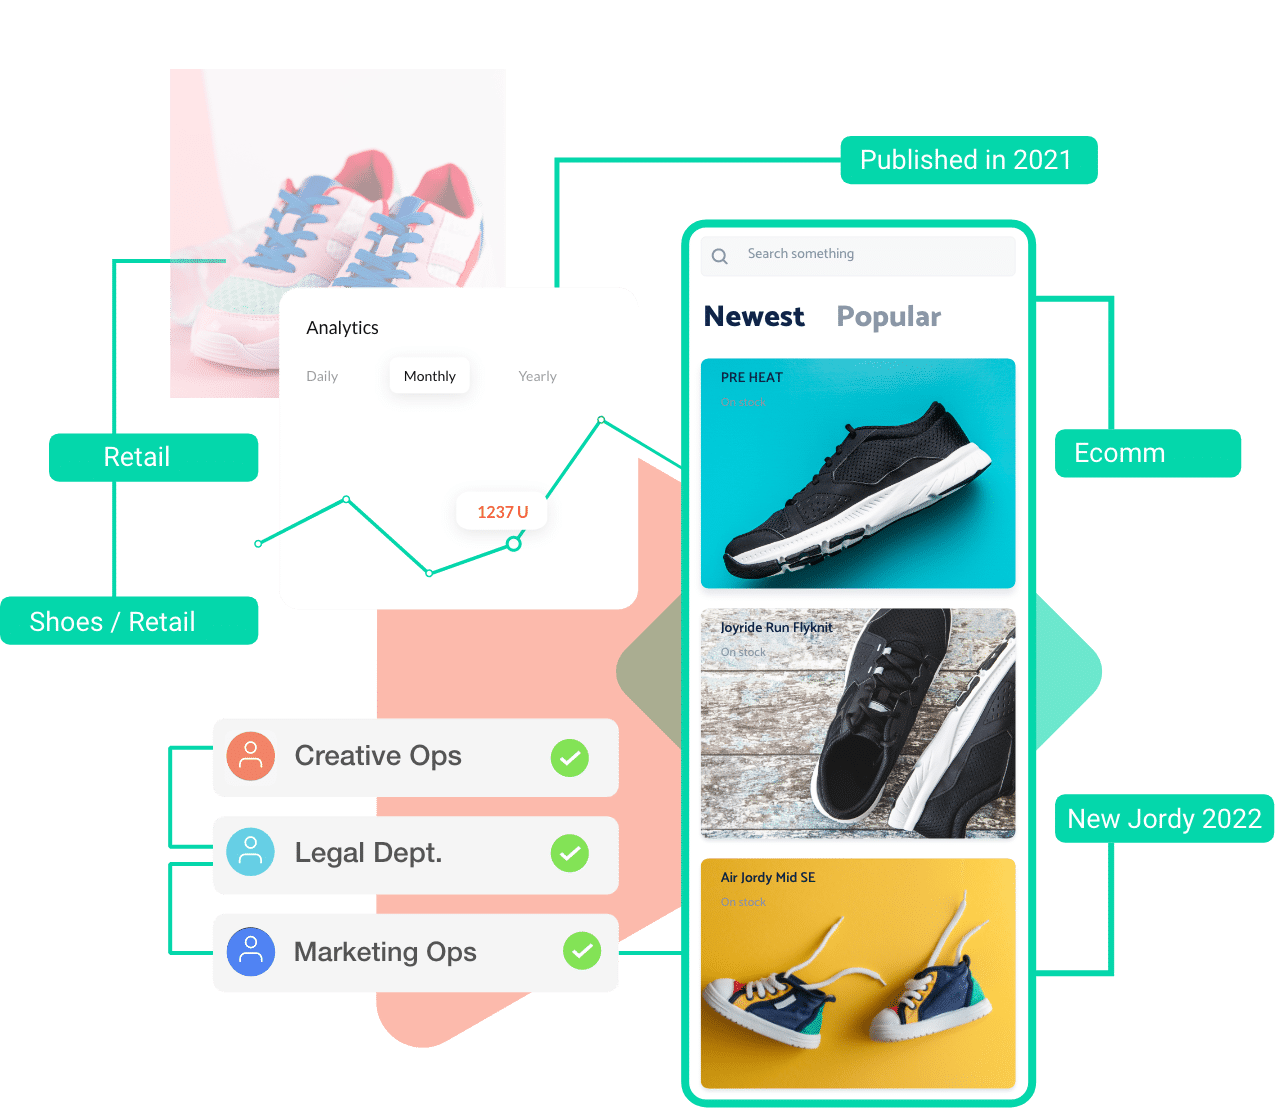 Picture of shoes with descriptive metadata tags, analytics chart and pictures of approval notifications